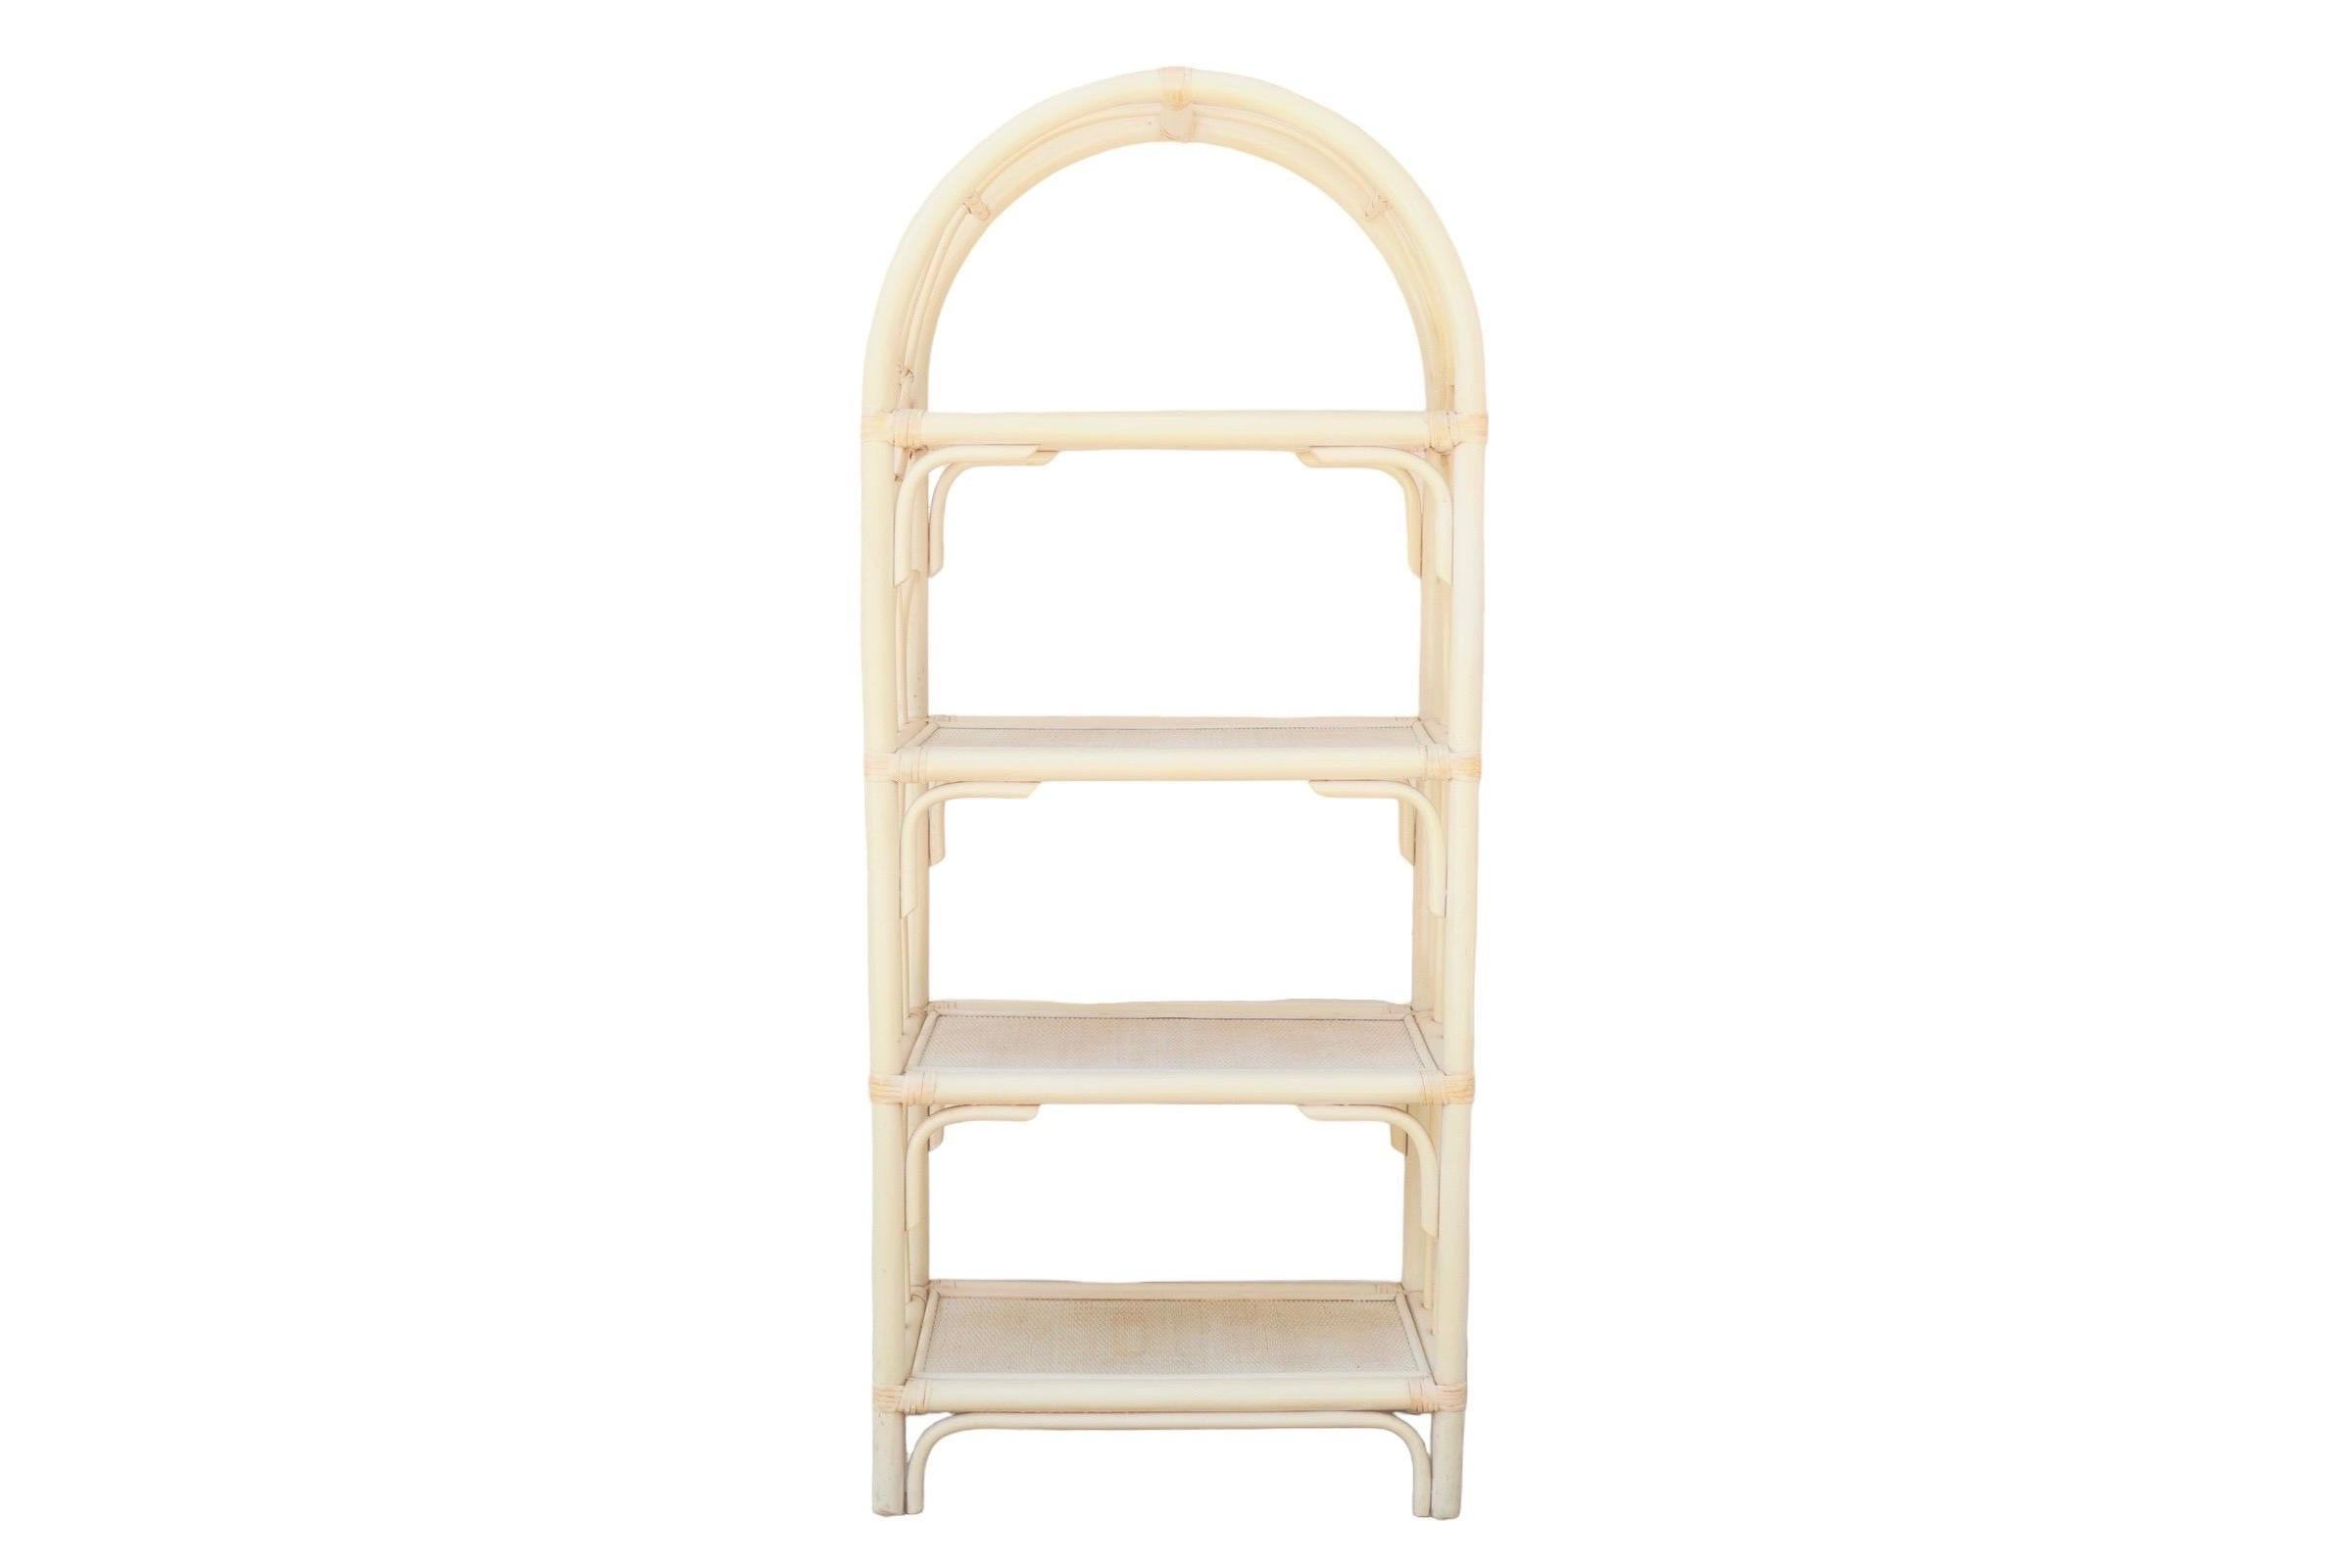 An arched bamboo & rattan etagere. Bent bamboo forms the frame, supporting four woven rattan shelves. Sides are decorated with pencil wood bamboo woven into lancet shapes secured with rattan wrapping. Painted throughout in a soft cream color.

